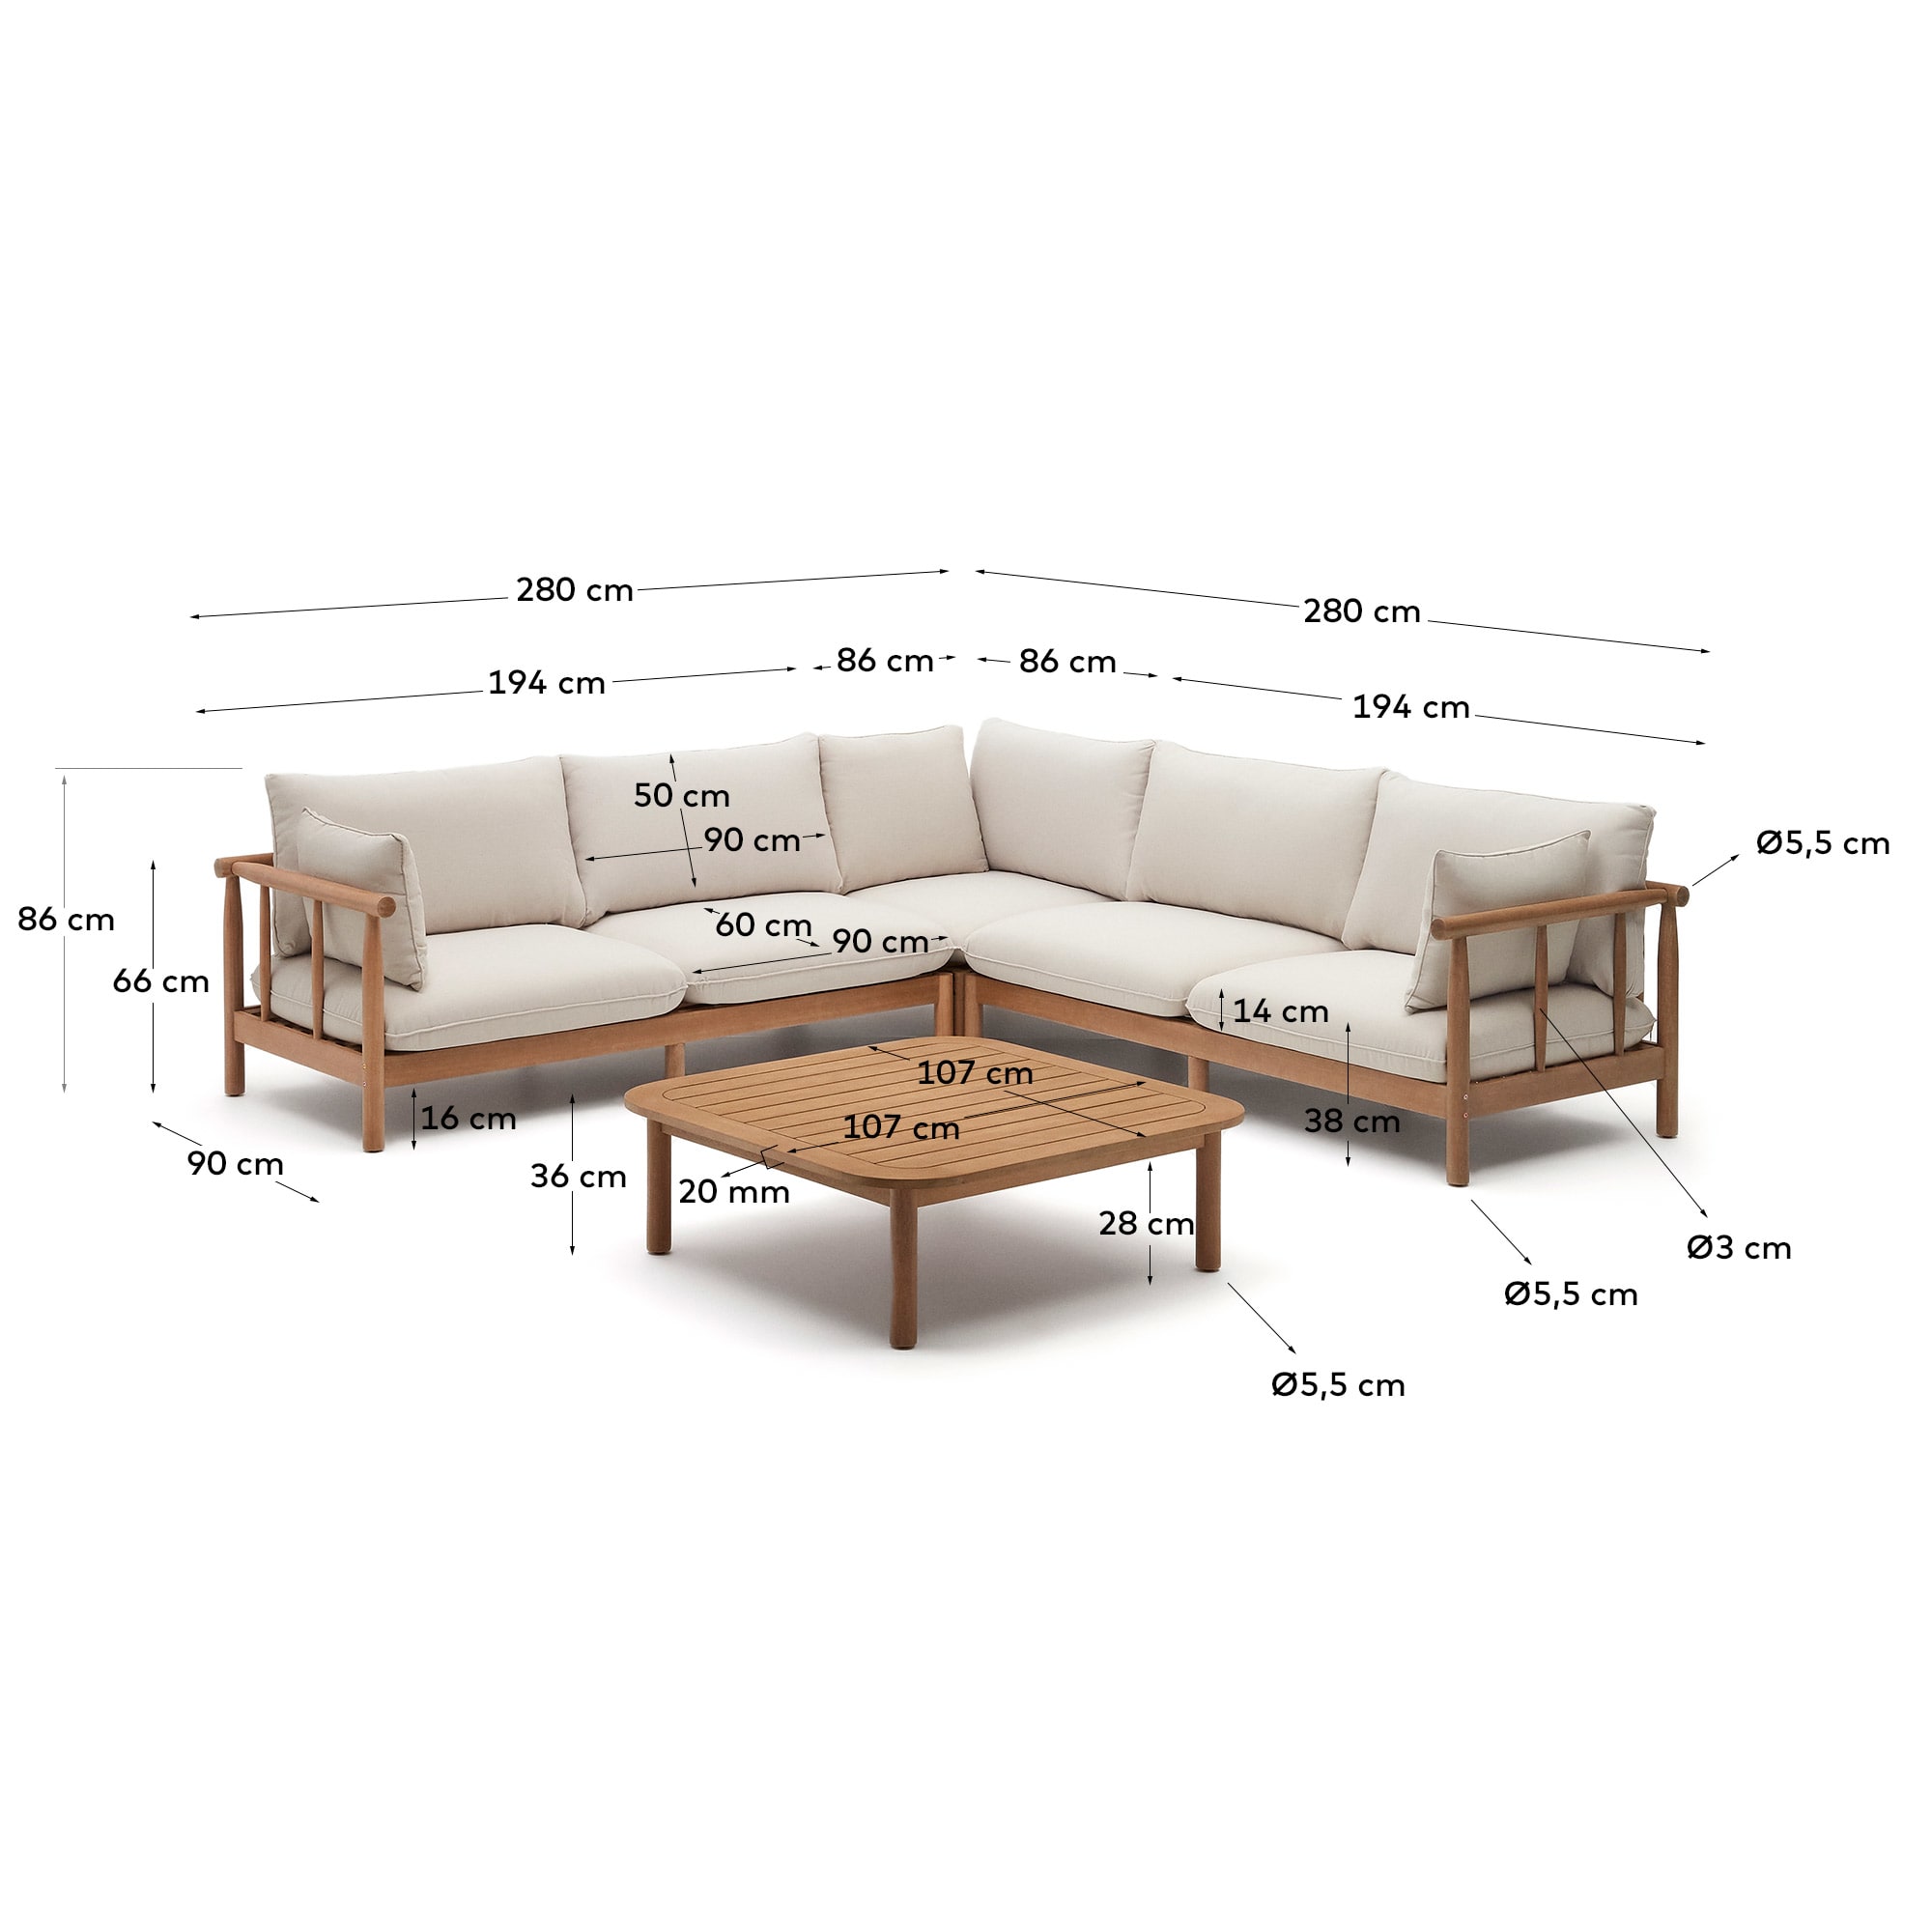 Sacova set, 5 seater corner sofa and coffee table made from solid eucalyptus wood - sizes